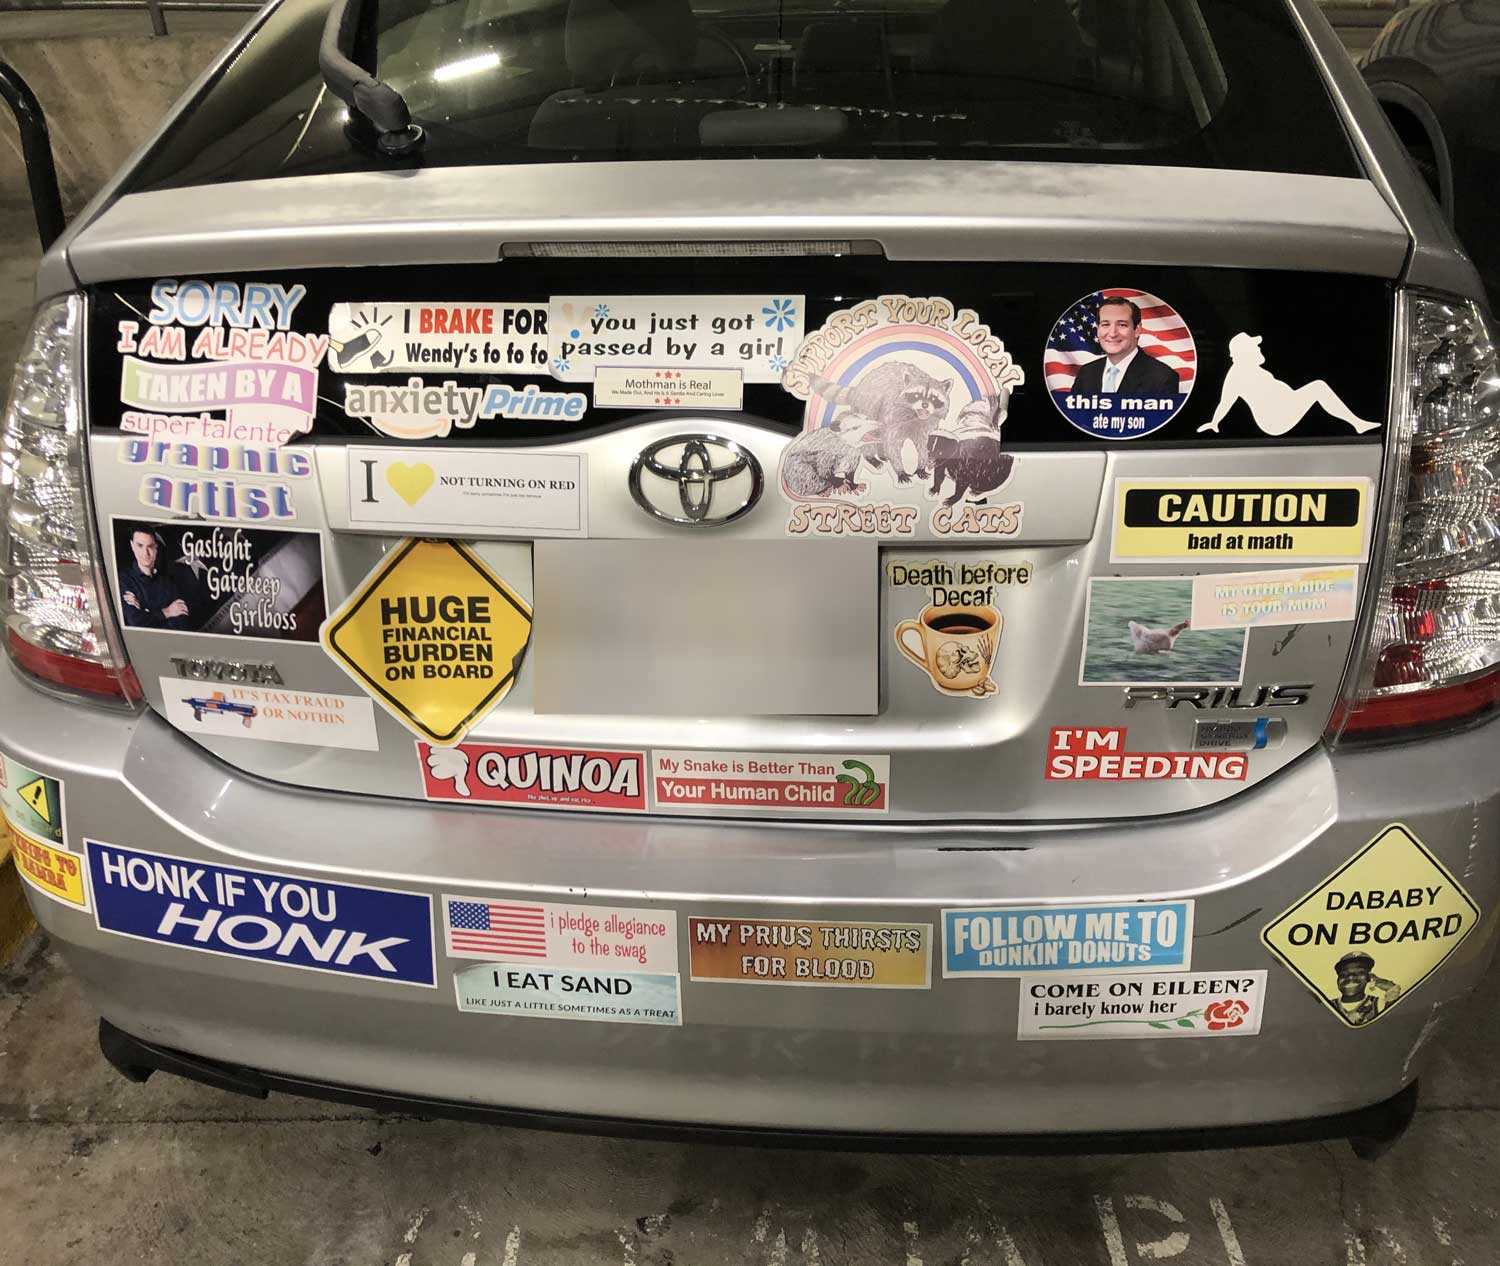 The stickers on the back of this Toyota Prius